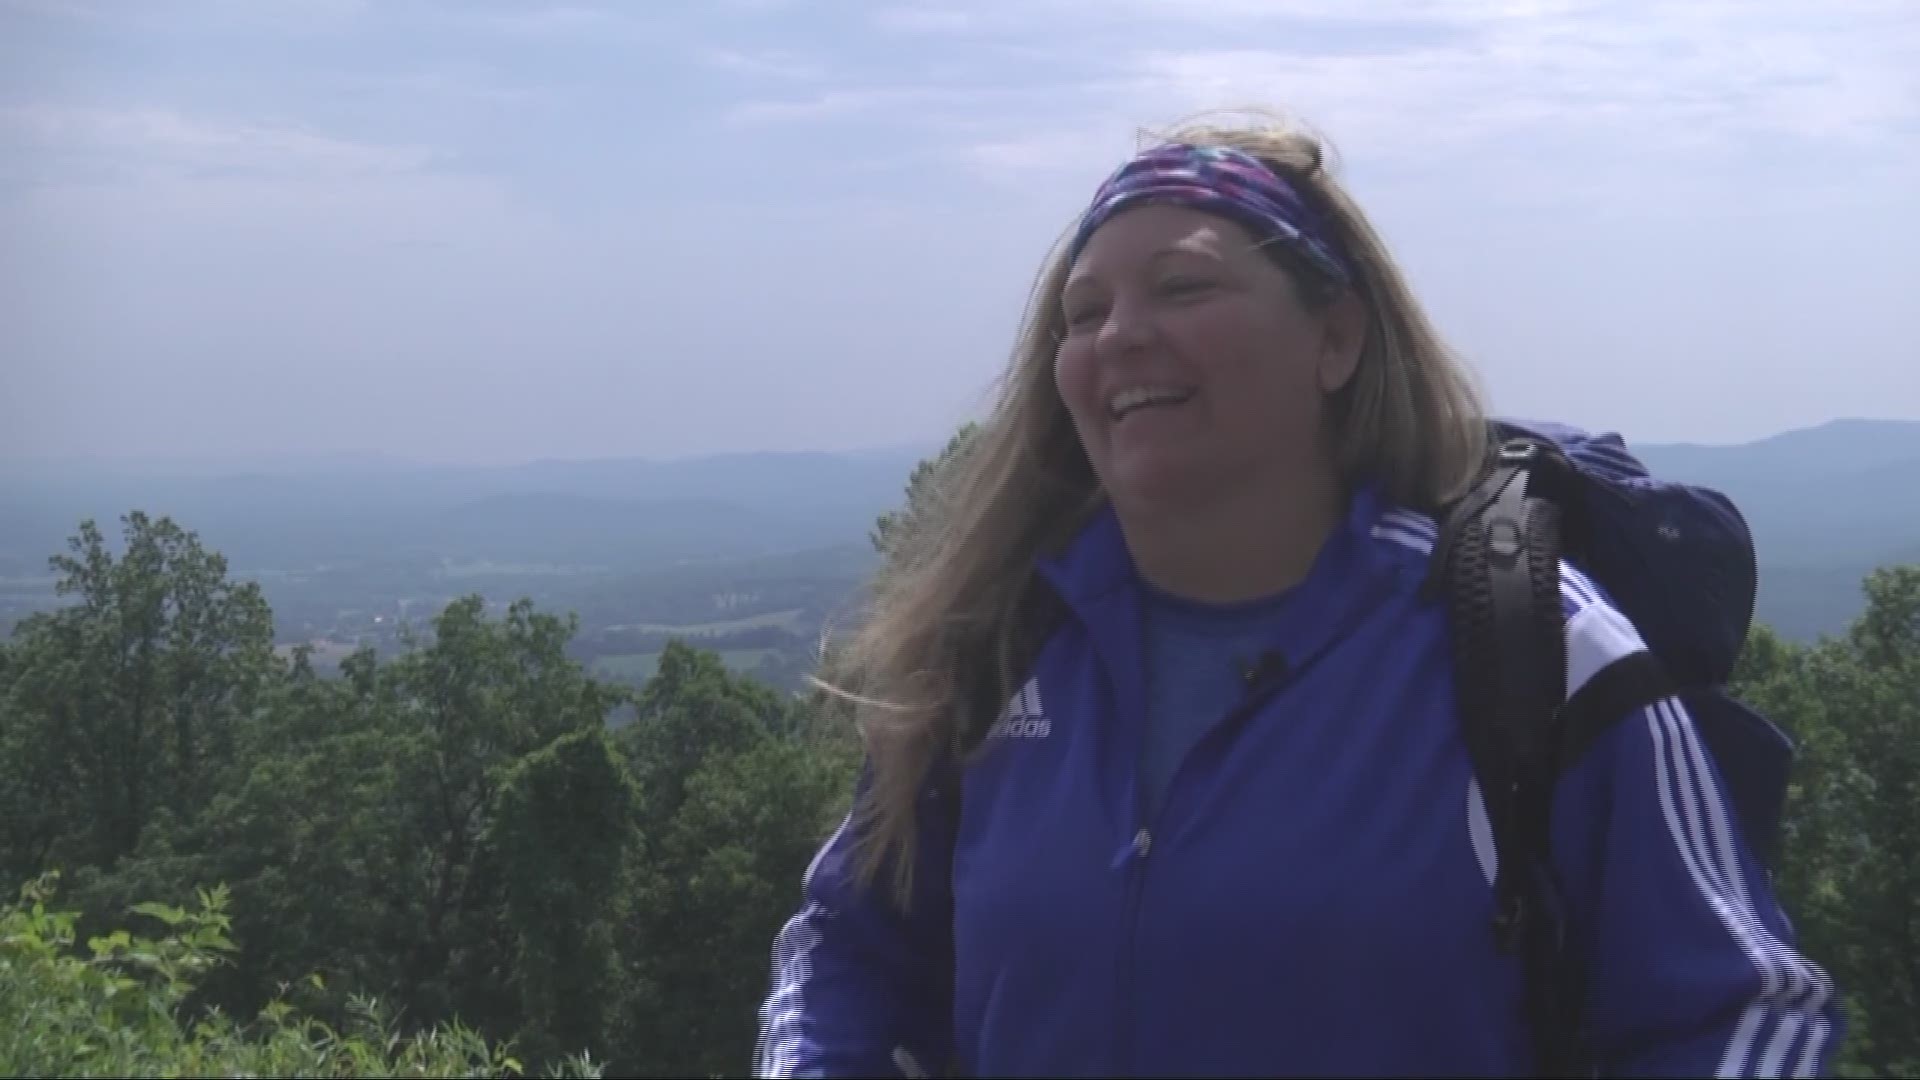 Stacey Kozel was wheelchair bound just a few months ago.  Now she's hiking the Appalachian Trial thanks to high-tech braces.